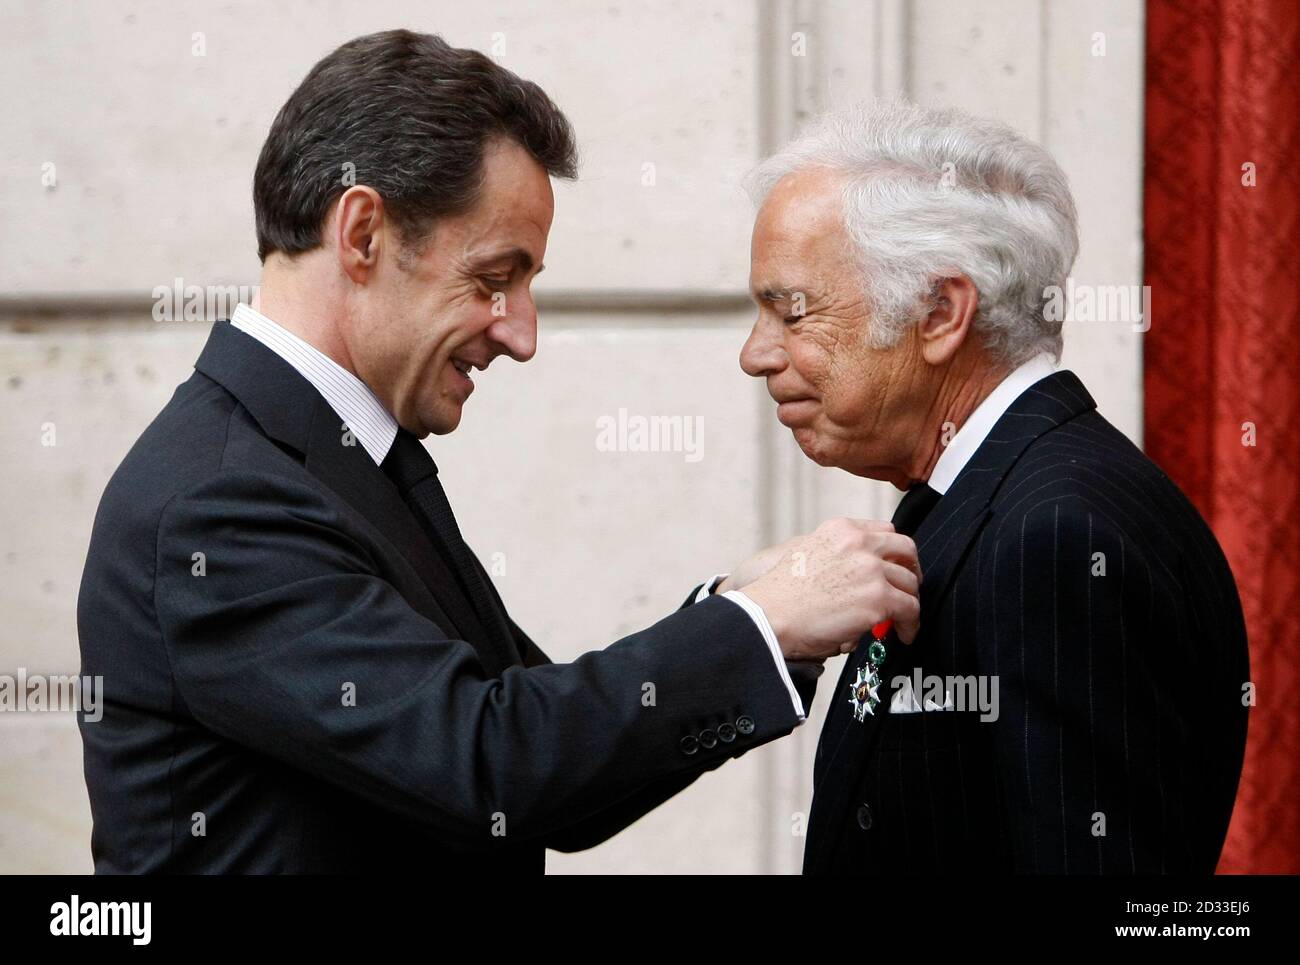 . fashion designer Ralph Lauren (R) receives the Chevalier of the Legion  of Honour from France's President Nicolas Sarkozy during a ceremony at the  Elysee Palace in Paris, April 15, 2010. REUTERS/Francois